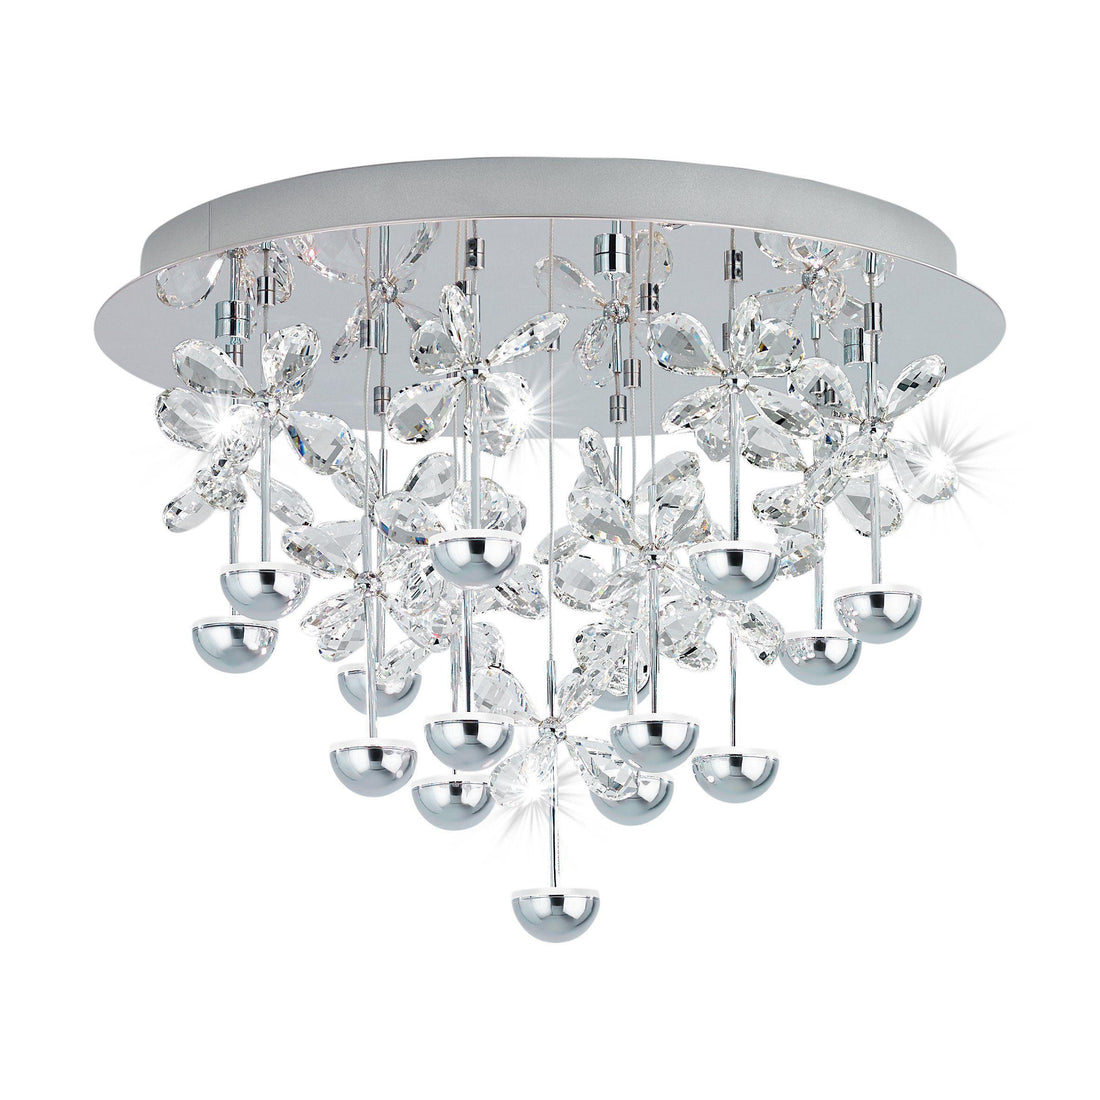 PIANOPOLI Ceiling Light by The Light Library